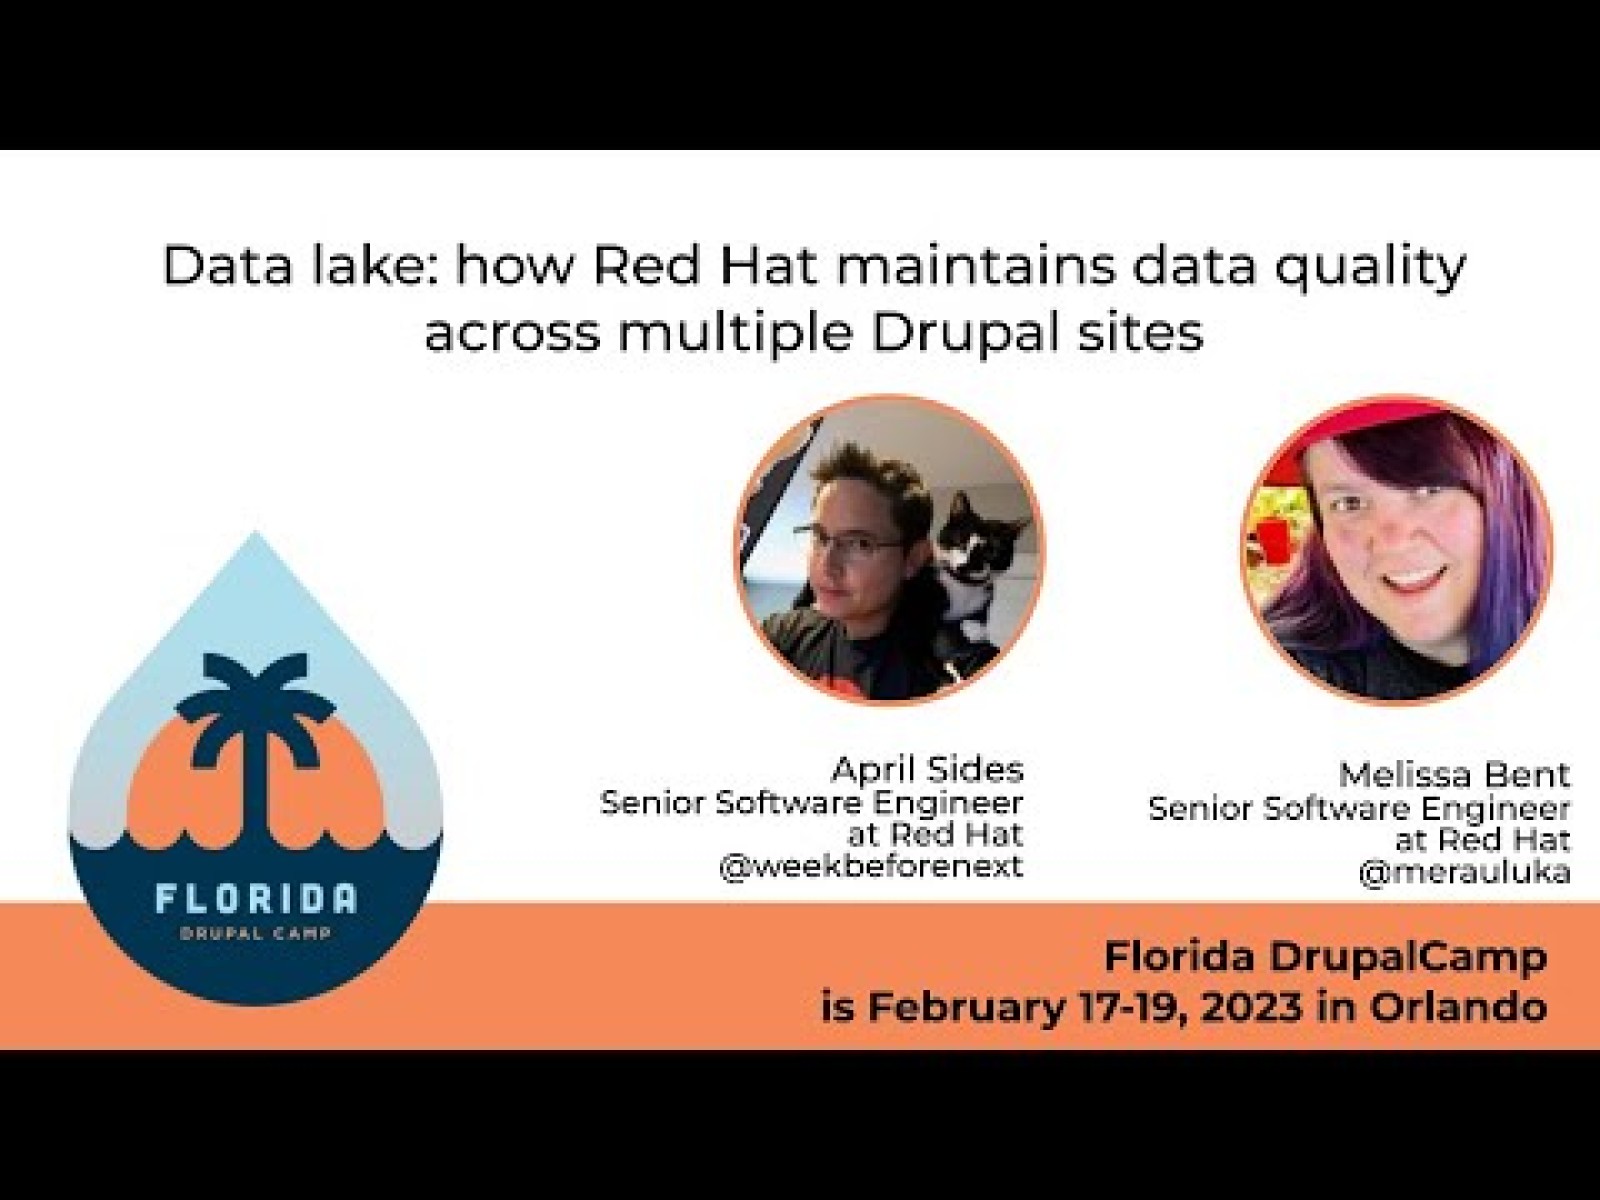 Data lake: how Red Hat maintains data quality across multiple Drupal sites